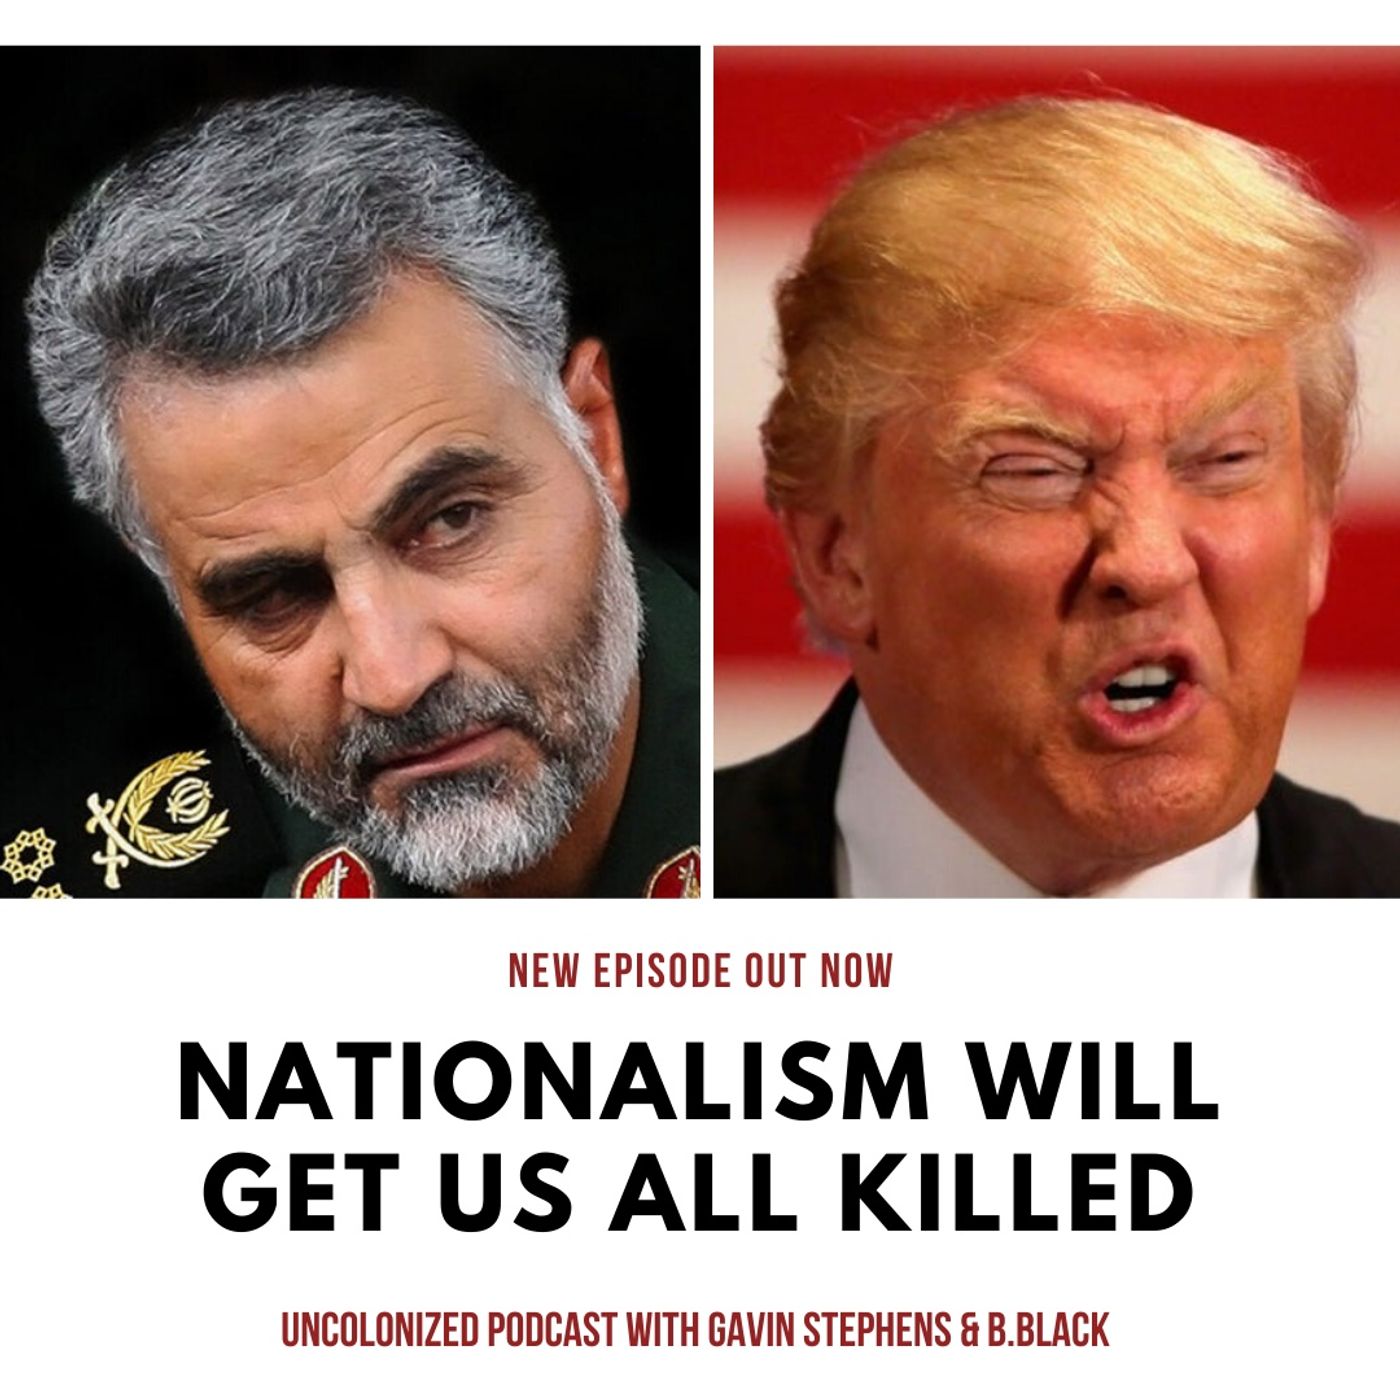 S04E14 - Nationalism will get us all killed